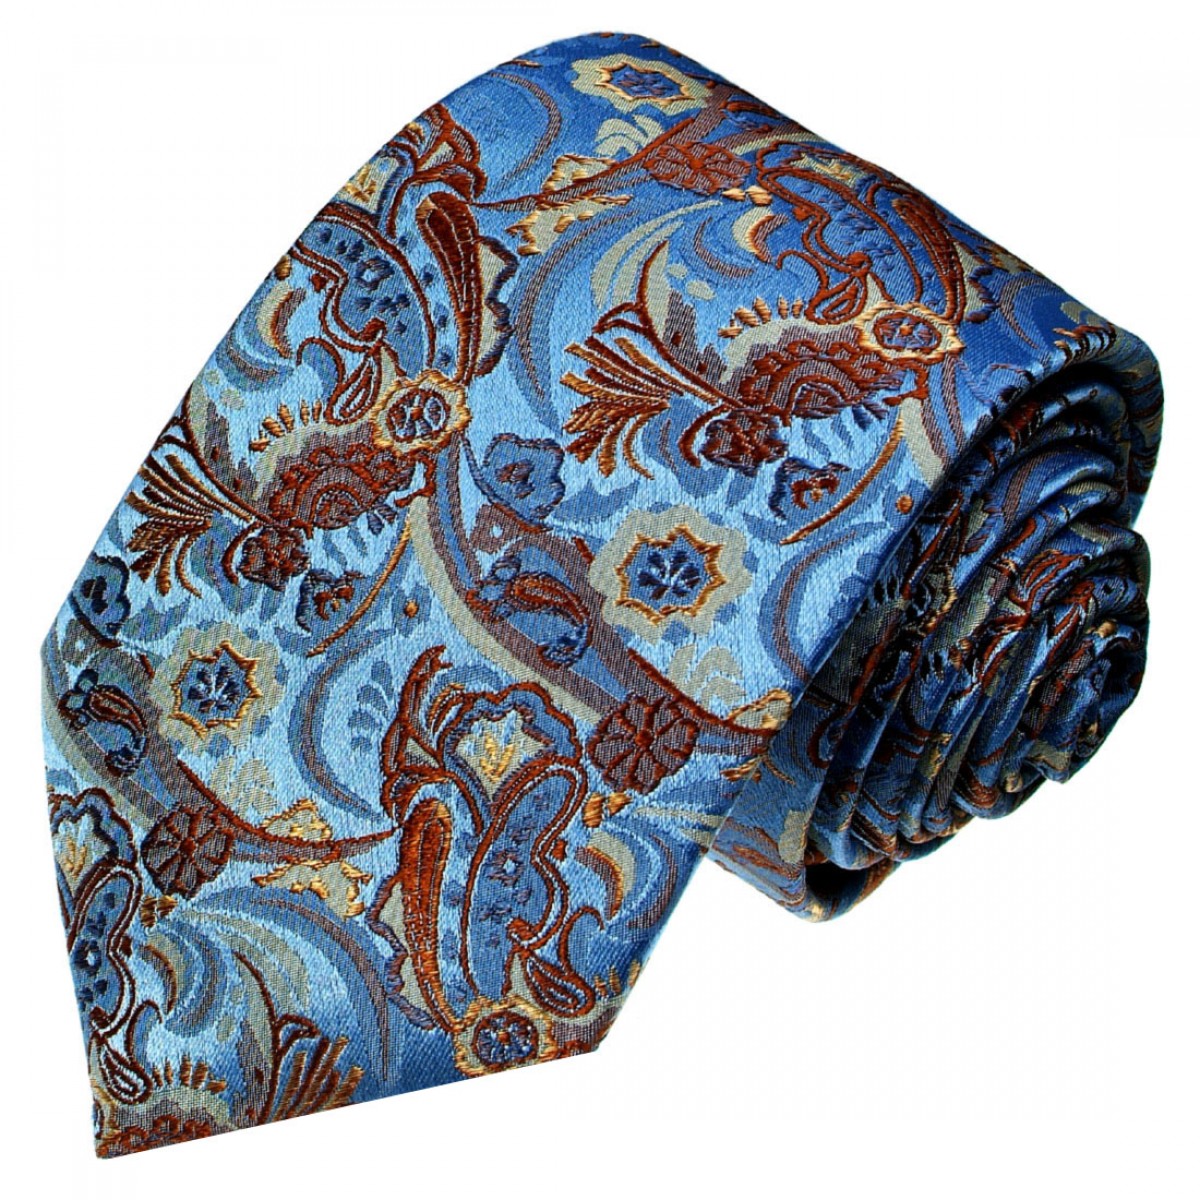 LORENZO CANA - The Official Online Store - Neck Tie Silk Paisley blue ...